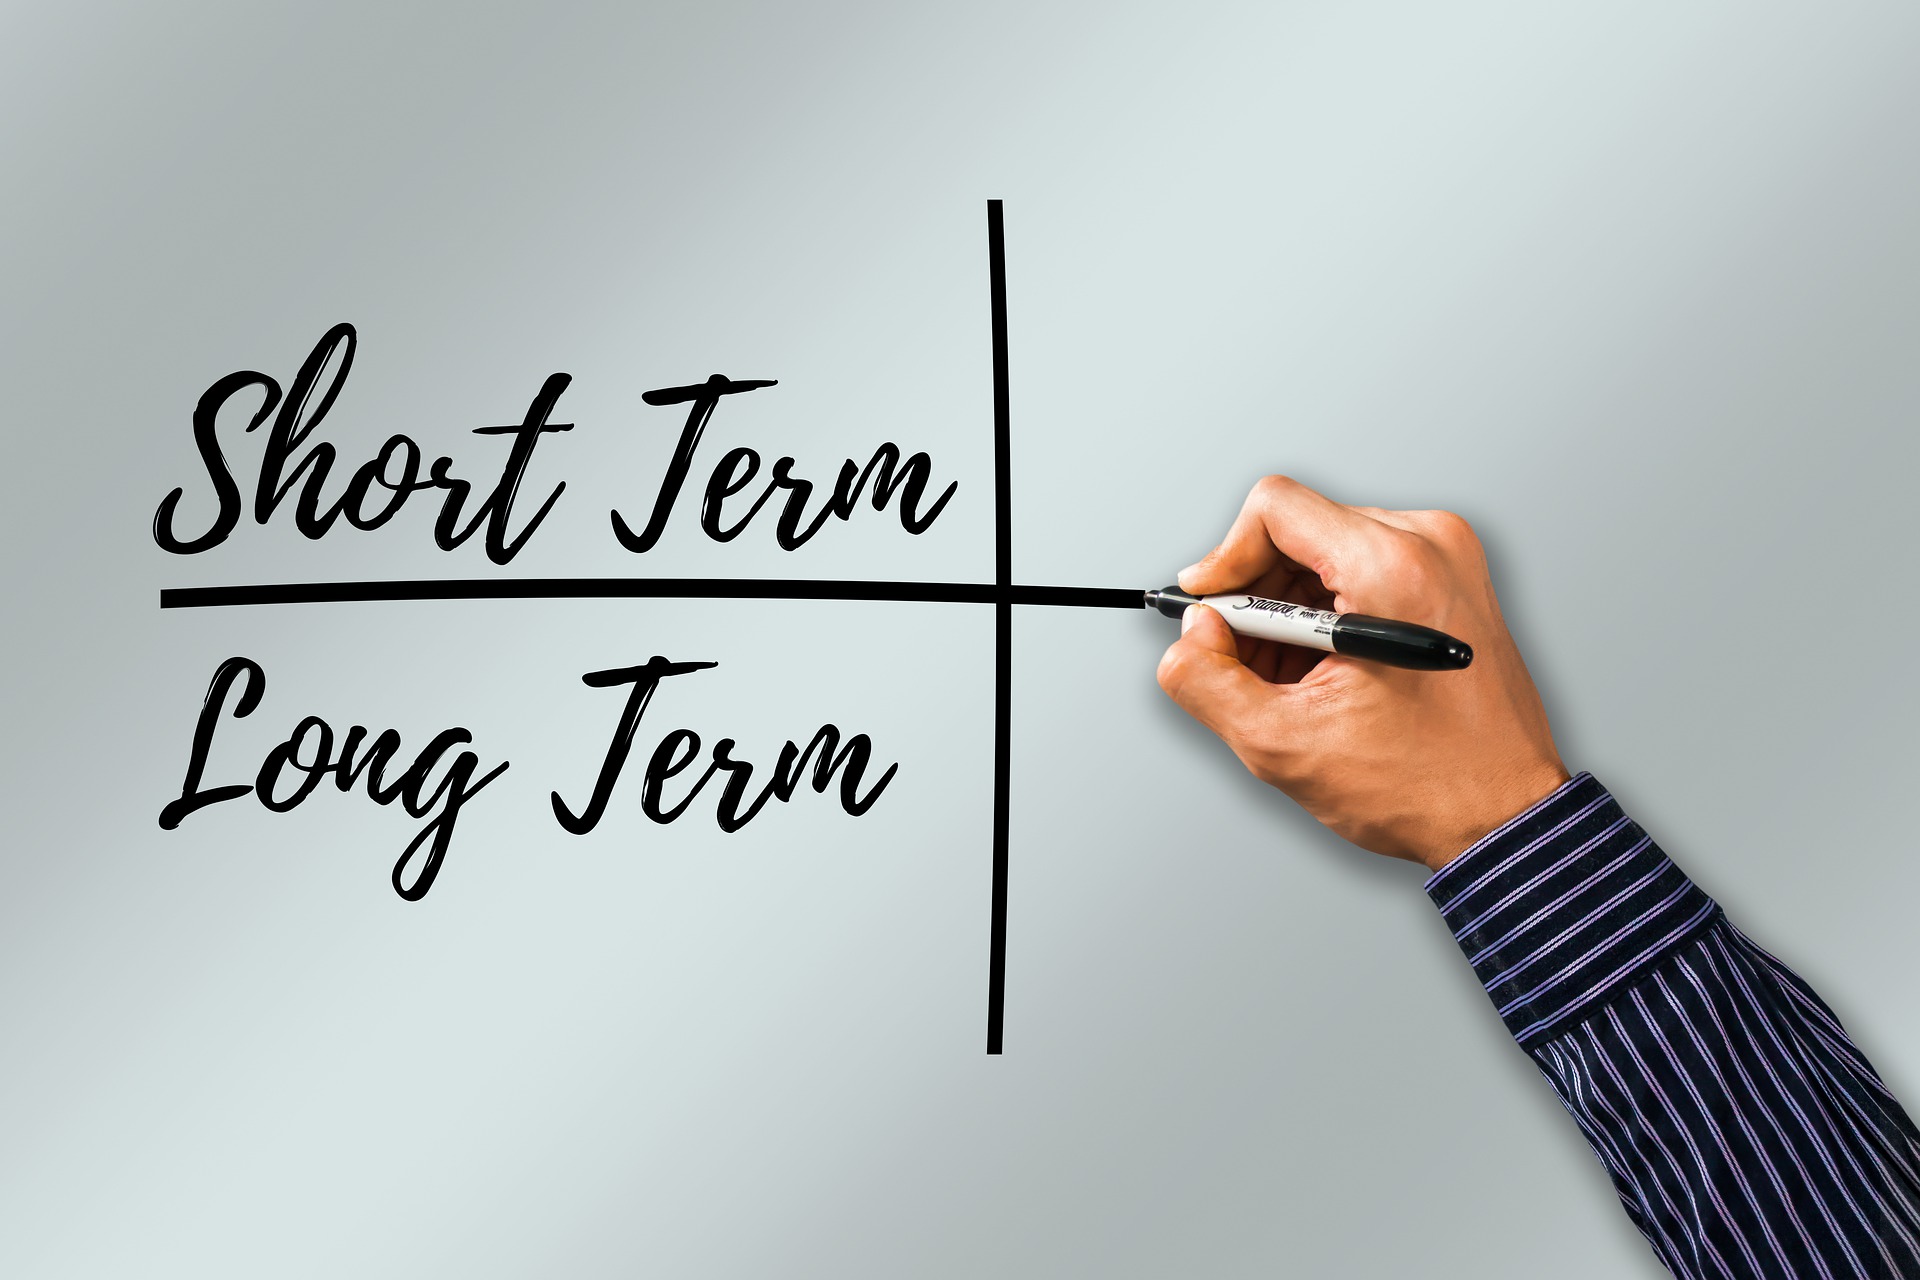 What should be the best home loan tenure?